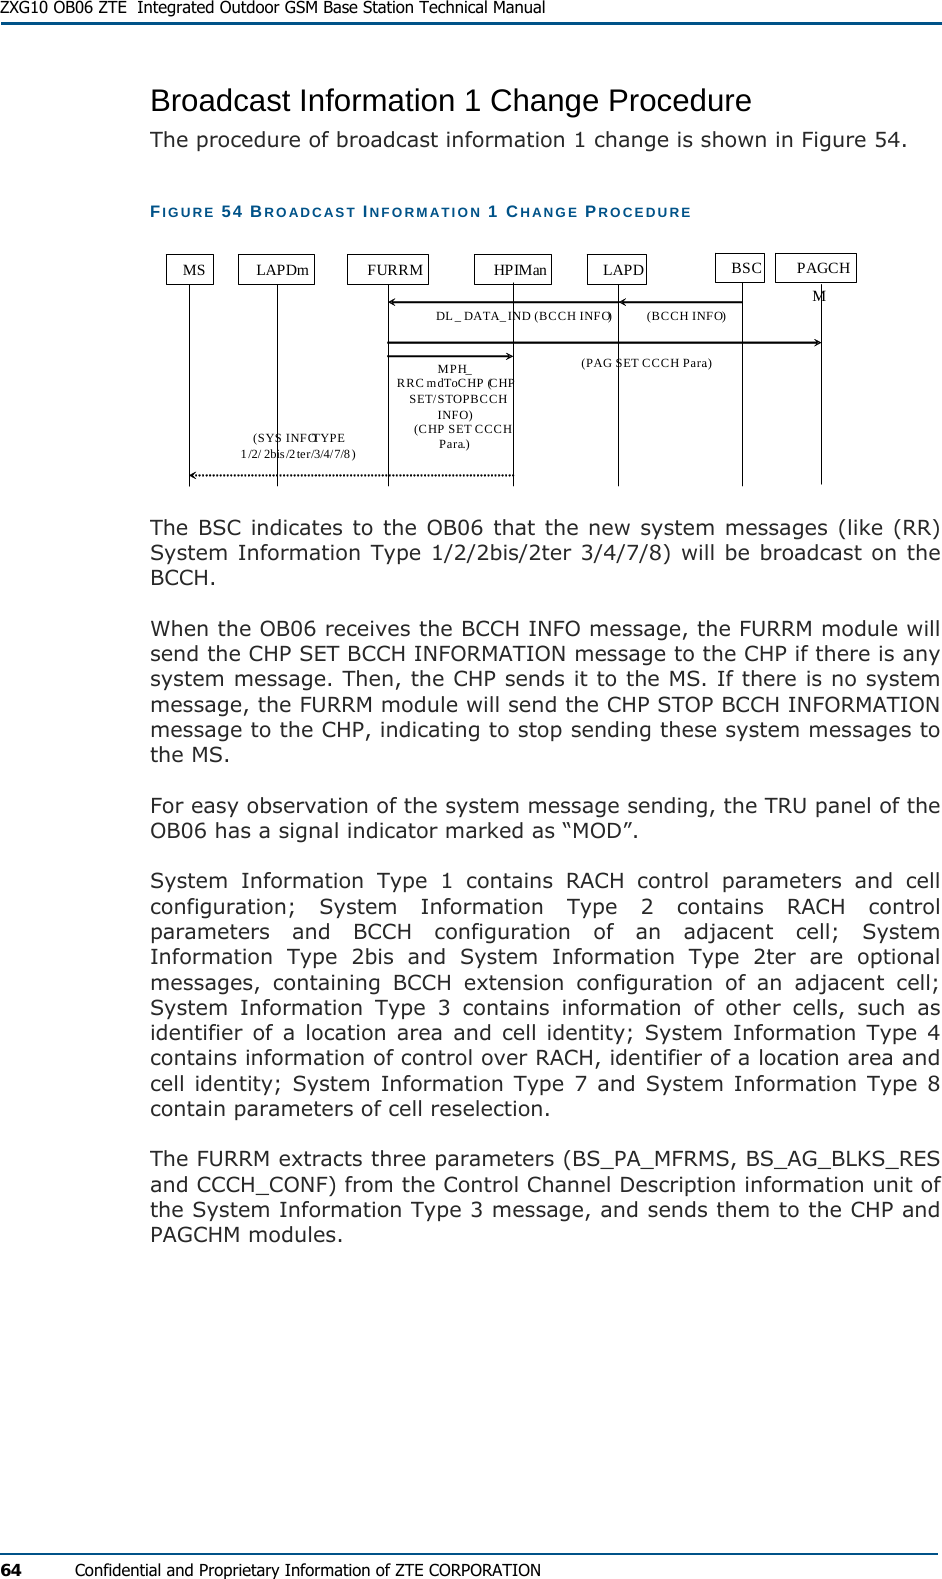  ZXG10 OB06 ZTE  Integrated Outdoor GSM Base Station Technical Manual 64  Confidential and Proprietary Information of ZTE CORPORATION Broadcast Information 1 Change Procedure The procedure of broadcast information 1 change is shown in Figure 54. FIGURE 54 BROADCAST INFORMATION 1 CHANGE PROCEDURE MS LAPDm FURRM HPIMan LAPD BSC PAGCHMDL_ DATA_IND (BCCH INFO) (BCCH INFO)MPH_ RRC mdToCHP (CHP SET/STOP BCCH INFO)(CHP SET CCCH Para.)(SYS INFOTYPE1/2/ 2bis /2ter/3/4/7/8 )(PAG SET CCCH Para.) The BSC indicates to the OB06 that the new system messages (like (RR) System Information Type 1/2/2bis/2ter 3/4/7/8) will be broadcast on the BCCH. When the OB06 receives the BCCH INFO message, the FURRM module will send the CHP SET BCCH INFORMATION message to the CHP if there is any system message. Then, the CHP sends it to the MS. If there is no system message, the FURRM module will send the CHP STOP BCCH INFORMATION message to the CHP, indicating to stop sending these system messages to the MS. For easy observation of the system message sending, the TRU panel of the OB06 has a signal indicator marked as “MOD”. System Information Type 1 contains RACH control parameters and cell configuration; System Information Type 2 contains RACH control parameters and BCCH configuration of an adjacent cell; System Information Type 2bis and System Information Type 2ter are optional messages, containing BCCH extension configuration of an adjacent cell; System Information Type 3 contains information of other cells, such as identifier of a location area and cell identity; System Information Type 4 contains information of control over RACH, identifier of a location area and cell identity; System Information Type 7 and System Information Type 8 contain parameters of cell reselection. The FURRM extracts three parameters (BS_PA_MFRMS, BS_AG_BLKS_RES and CCCH_CONF) from the Control Channel Description information unit of the System Information Type 3 message, and sends them to the CHP and PAGCHM modules. 